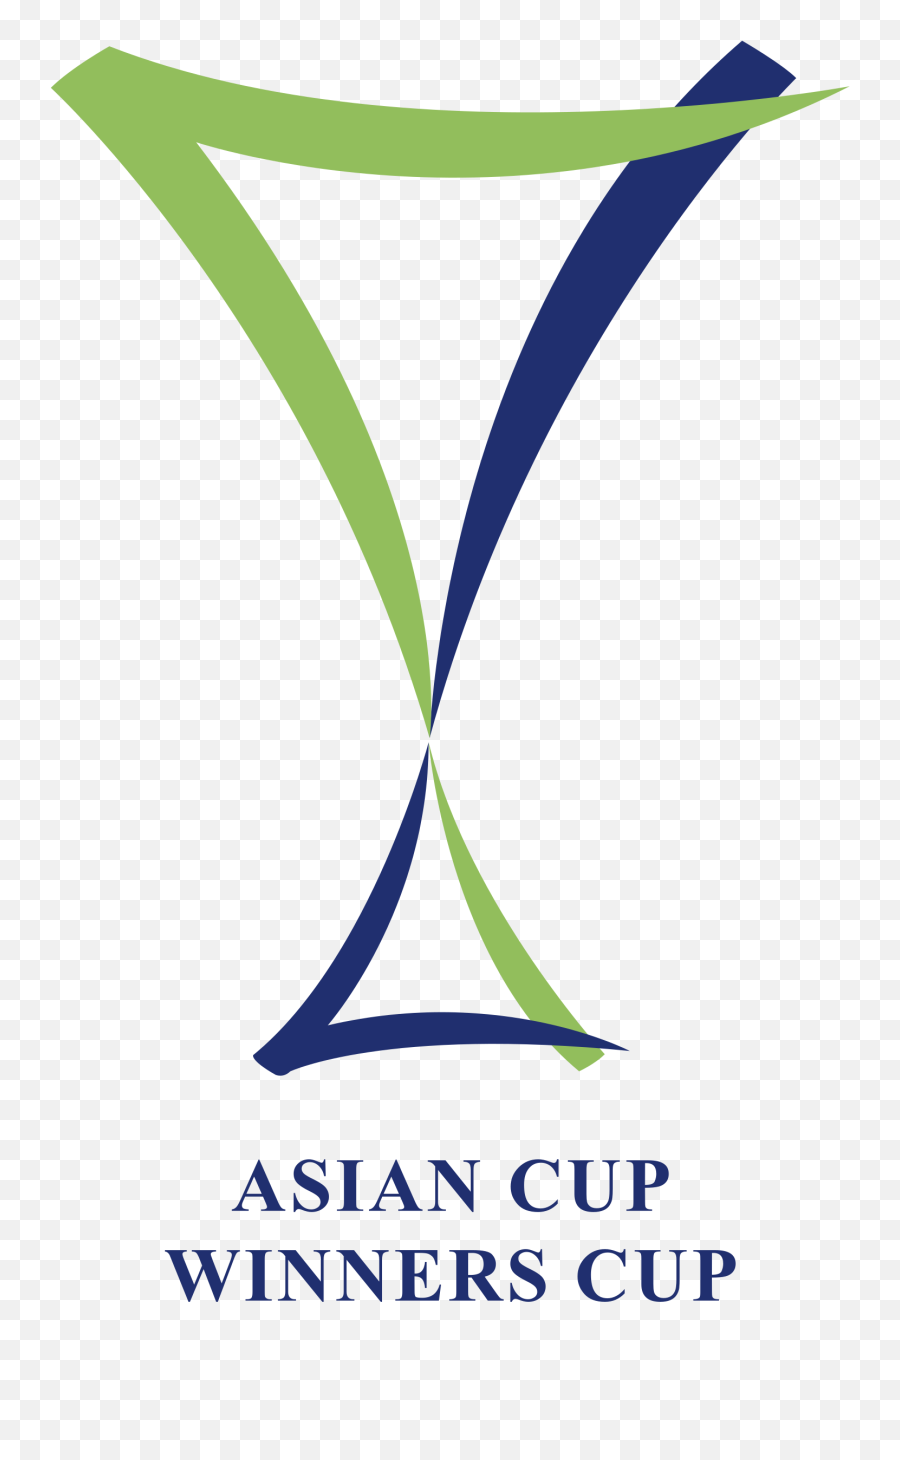 Asian Cup Winners Logo Png Transparent U0026 Svg Vector - Asian Cup Cup,Asian Png